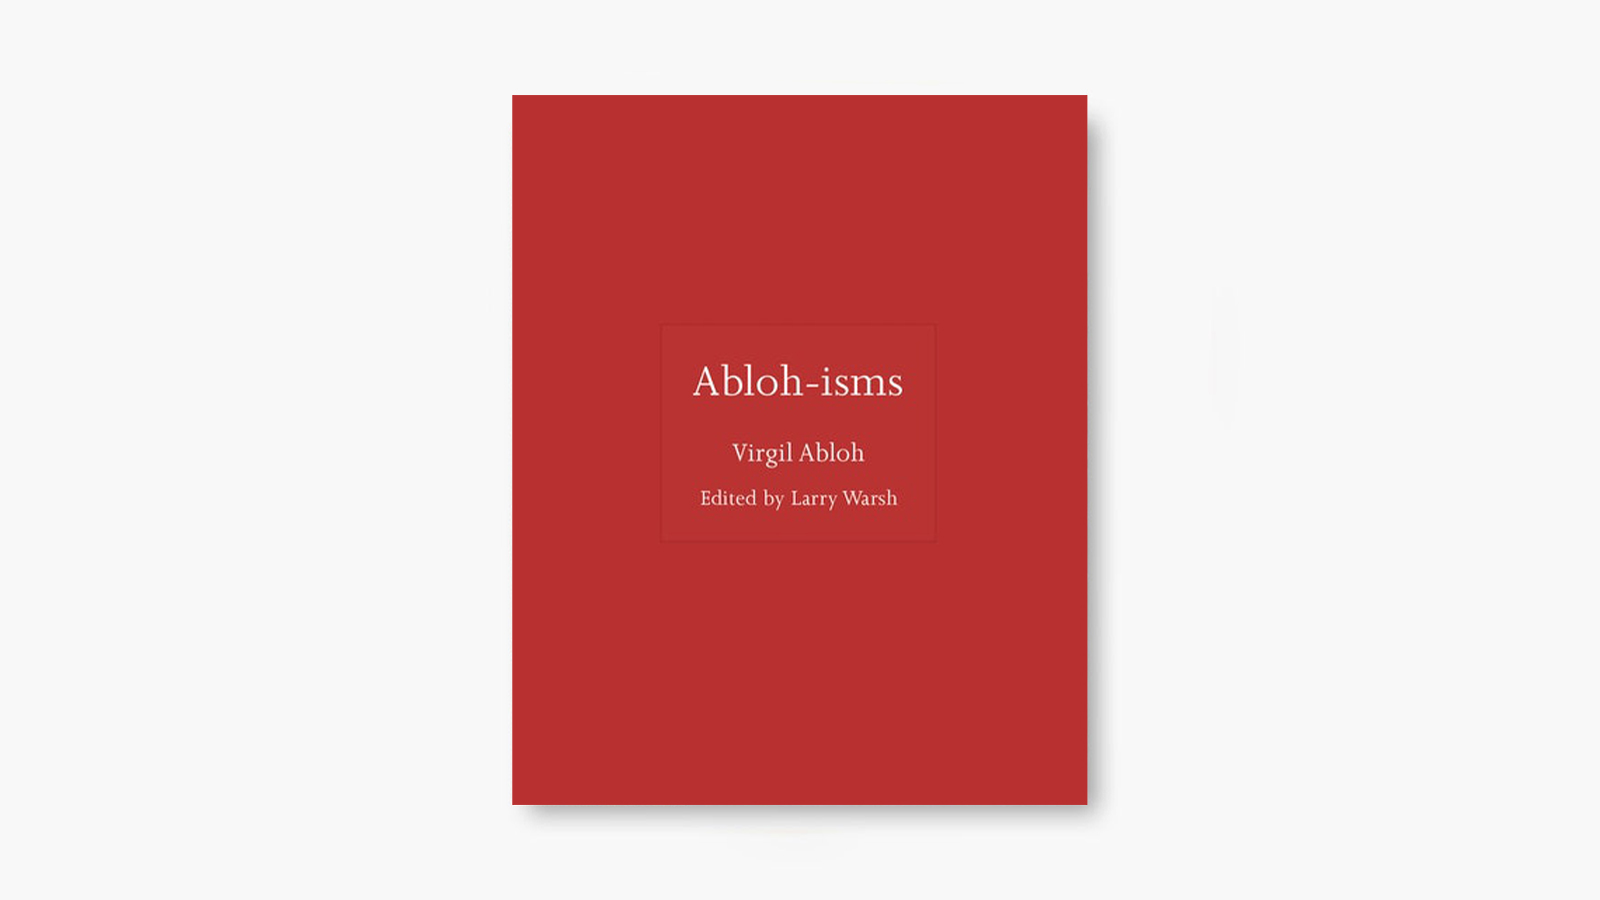 ‘Abloh-isms’ Edited by Larry Warsh